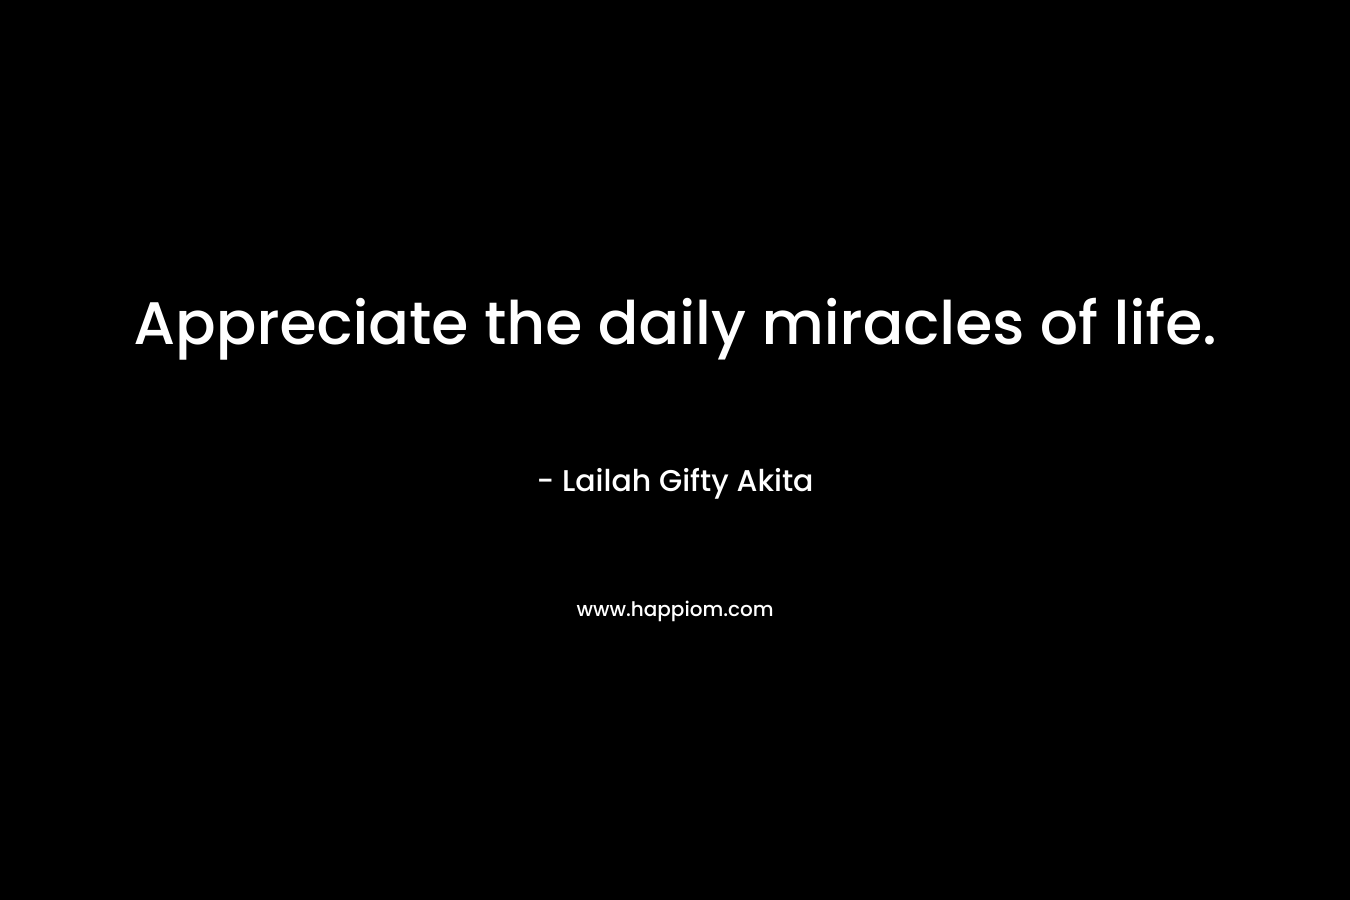 Appreciate the daily miracles of life.